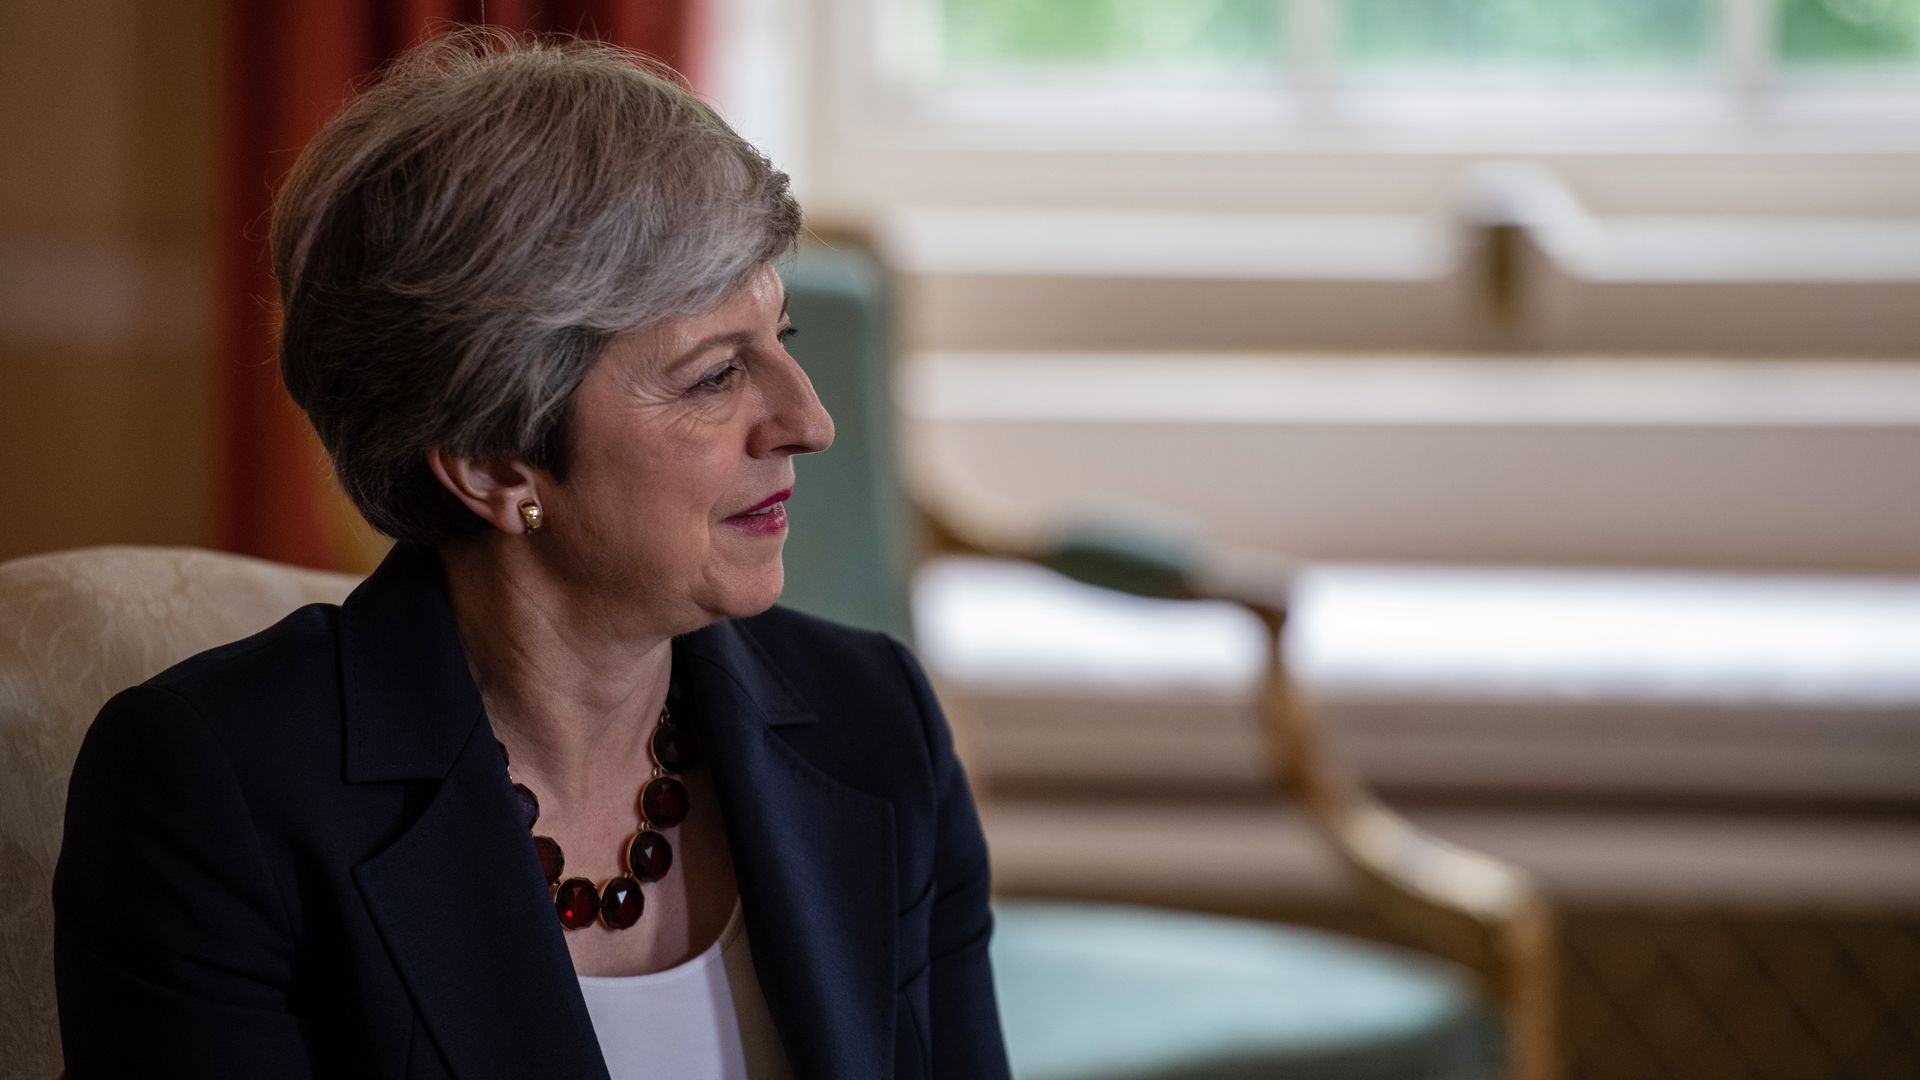 In this image, Theresa May sits and listens to someone speaking to her right.